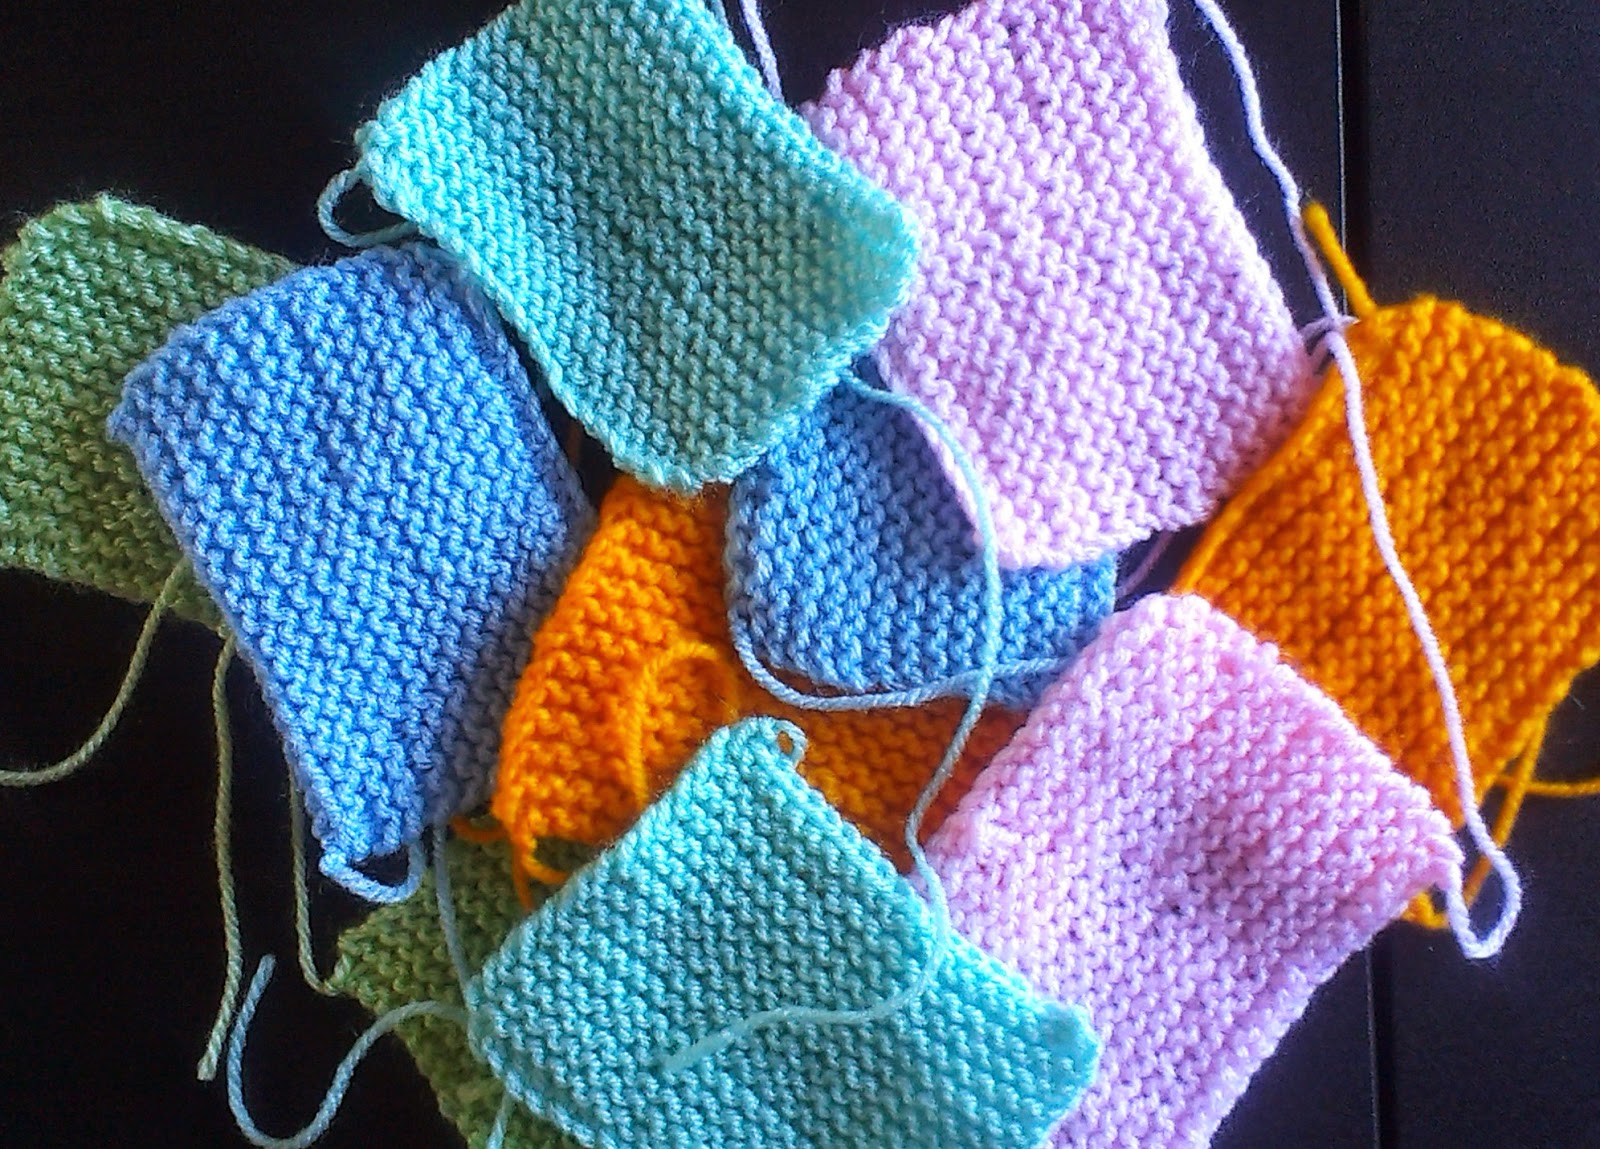 Ten squares knitted